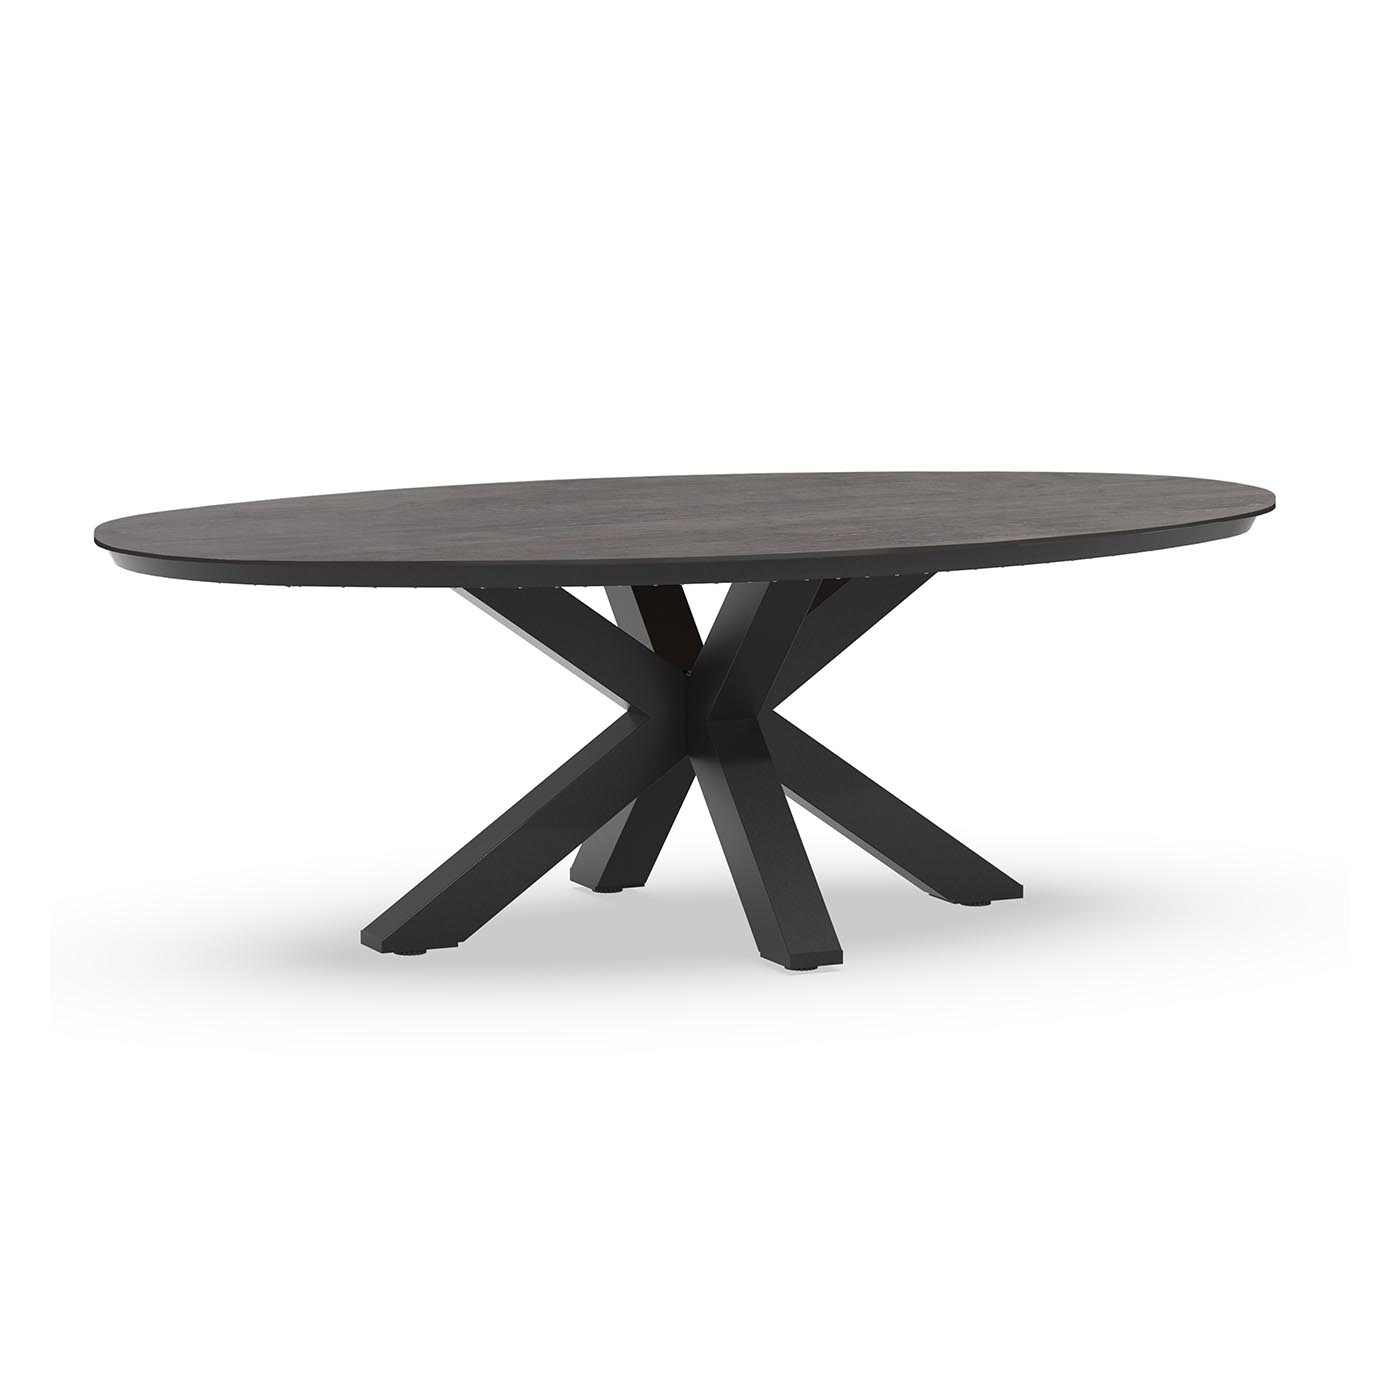 Oblong Dining Table Trespa Forest Grey 220 x 130 cm Charcoal